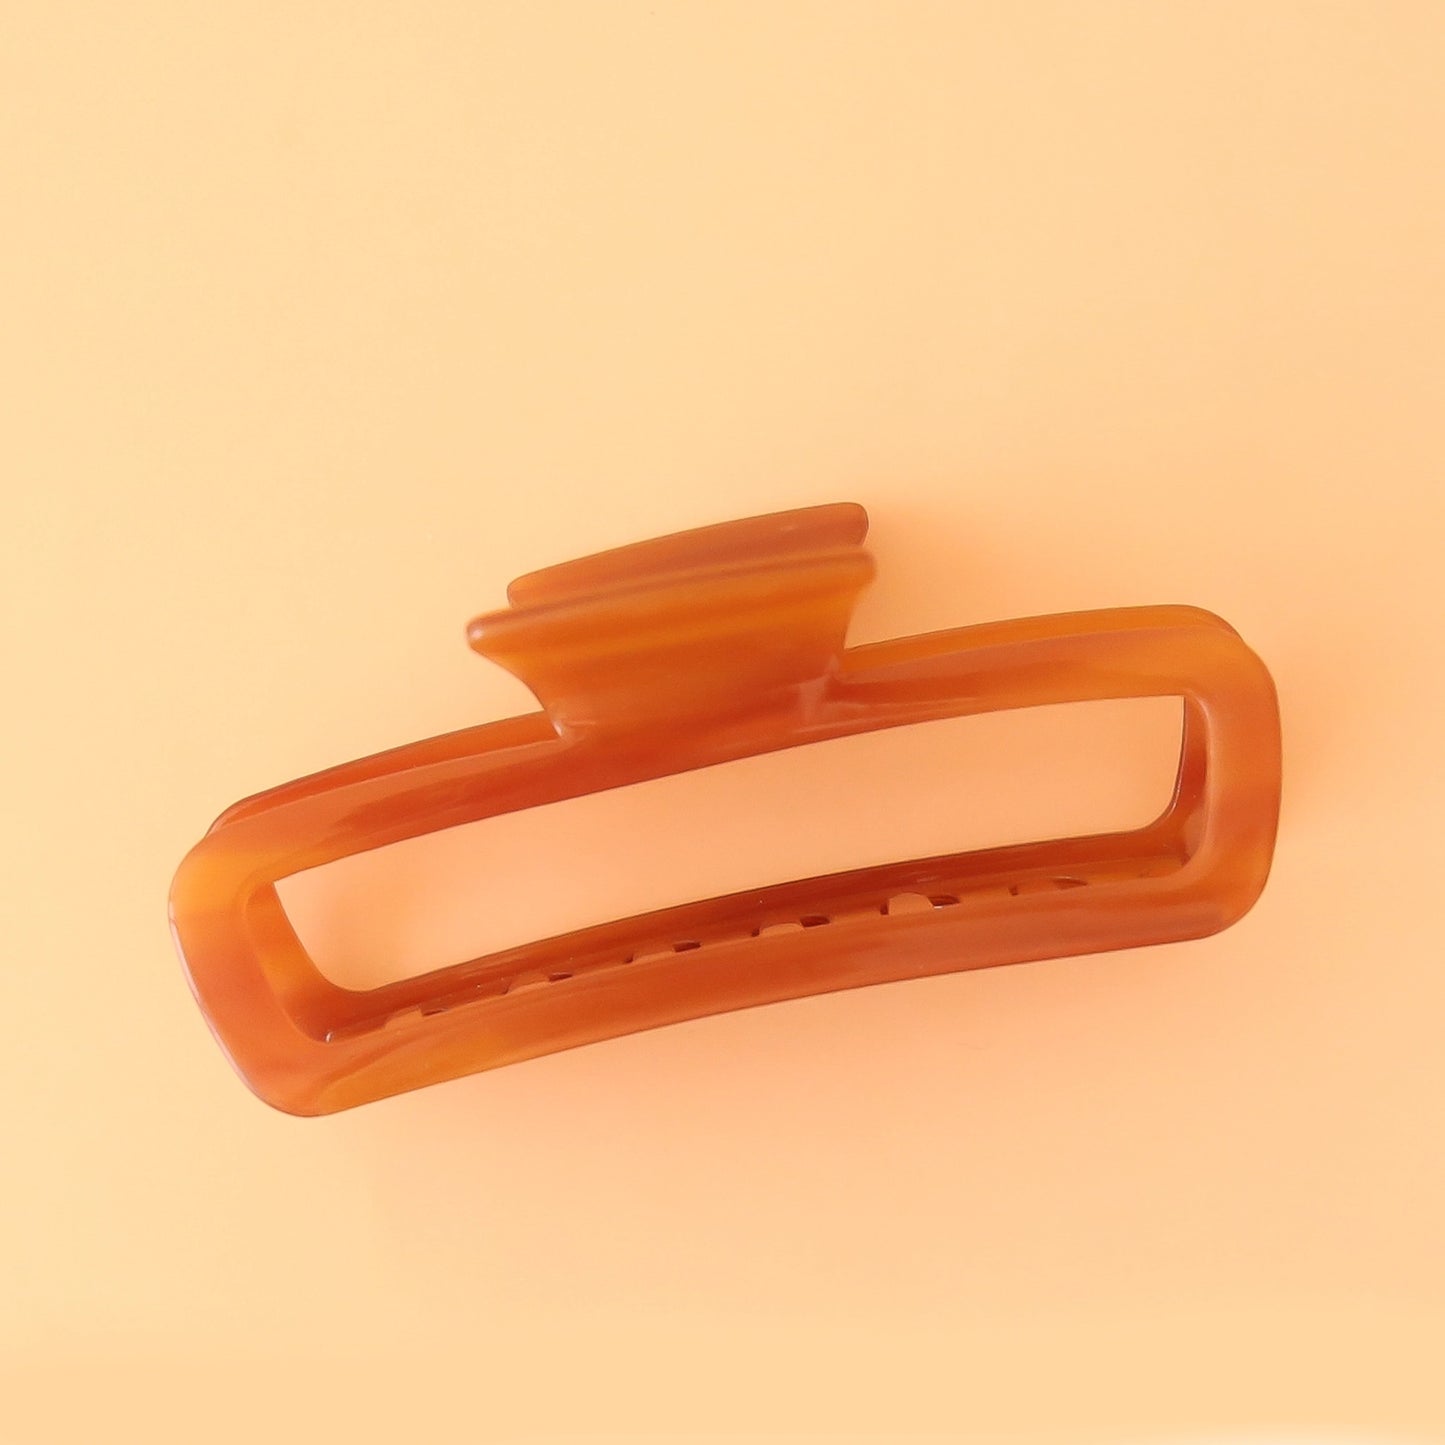 On a peachy background is the Cabana Claw Clip in the shade Honey which is an orangey, amber shade.